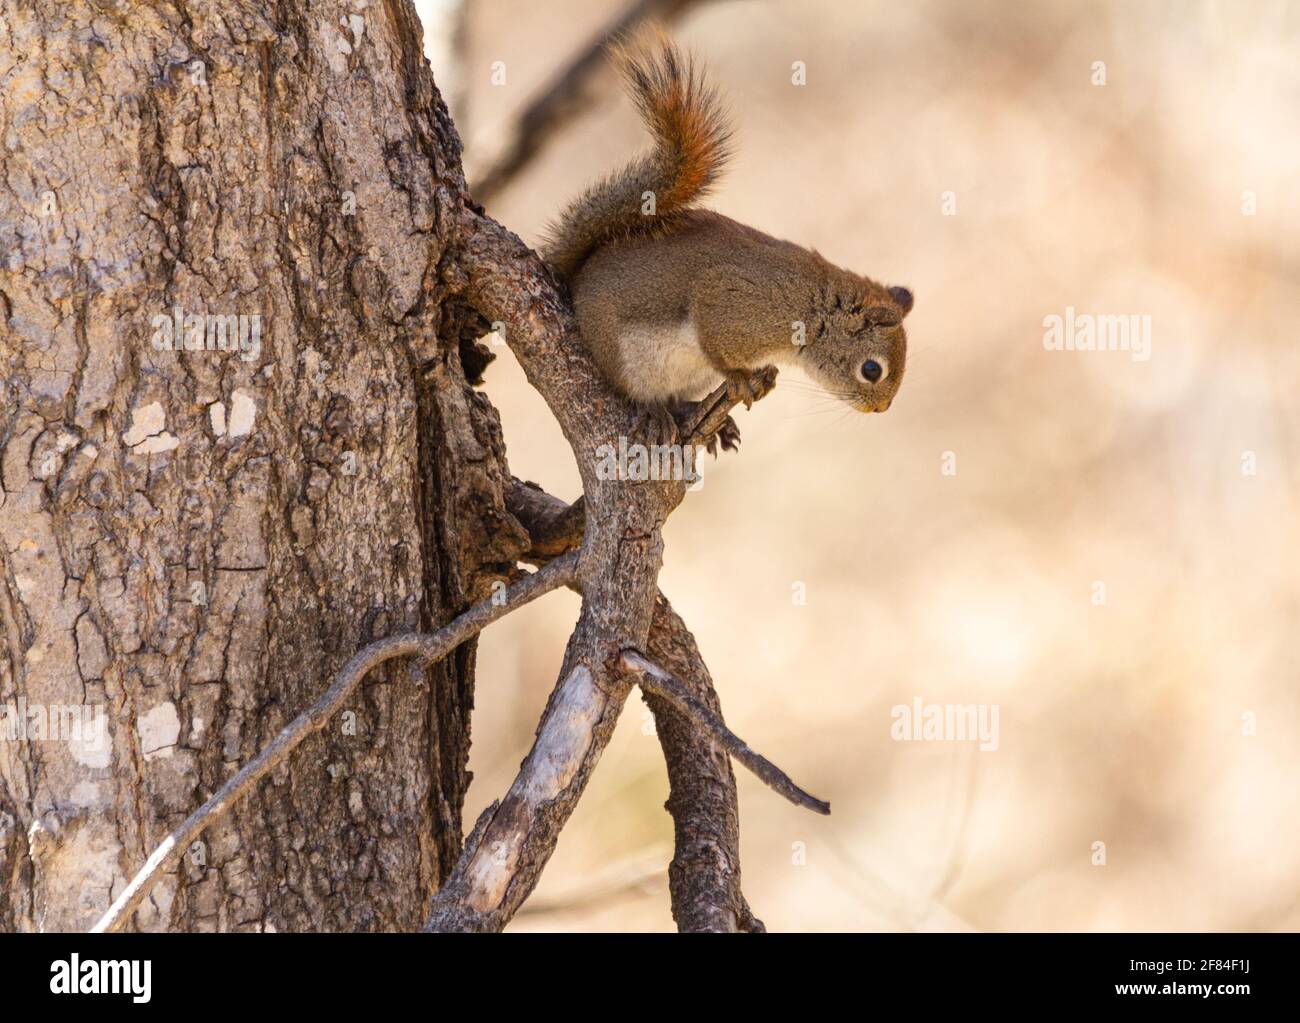 Small red squirrel looking down at a bird feeder hanging on a lower branch of the tree he is perched in. Stock Photo